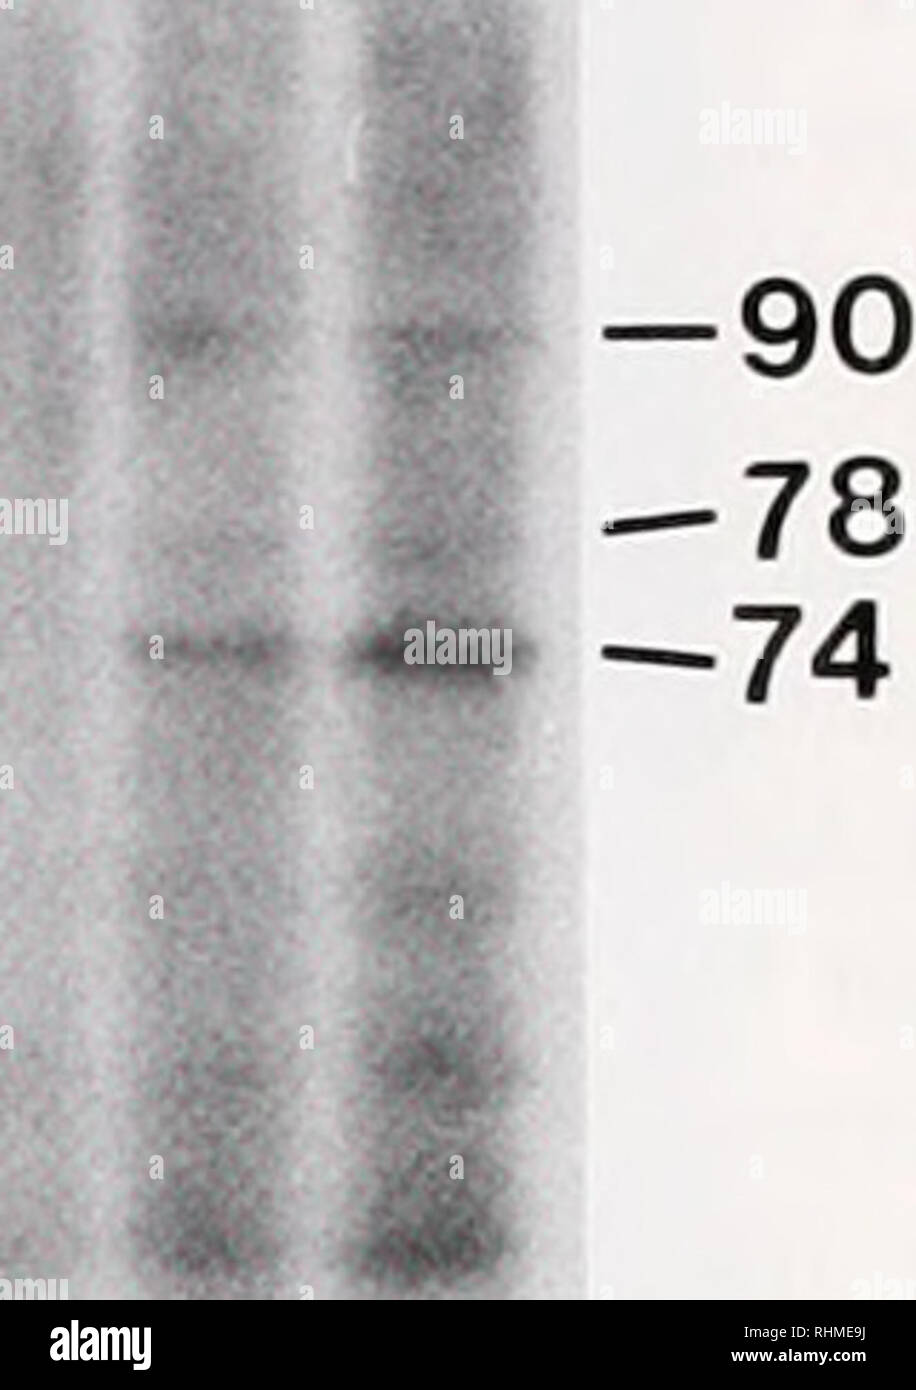 . The Biological bulletin. Biology; Zoology; Biology; Marine Biology. -74 - * * -33. -28 •27 f^rilMh ^^fe ^^ife Figure 1. Autoradiograms showing proteins synthesized by Montastraea faveolata after exposure to various temperatures. (A) Synthesis after 1 week at 31 °C or 2 h at 34°C compared to controls (28°C). The positions of hsps produced at approximately 95, 90, 78, 74. and 33 kDa are indicated. (B &amp; C) Synthesis after 2 h at 33° or 35°C compared to controls (22°C). The positions of hsps produced at approximately 74, 28. and 27 kDa (B) and 90. 78. and 74 kDa (C) are indicated. Each lane  Stock Photo